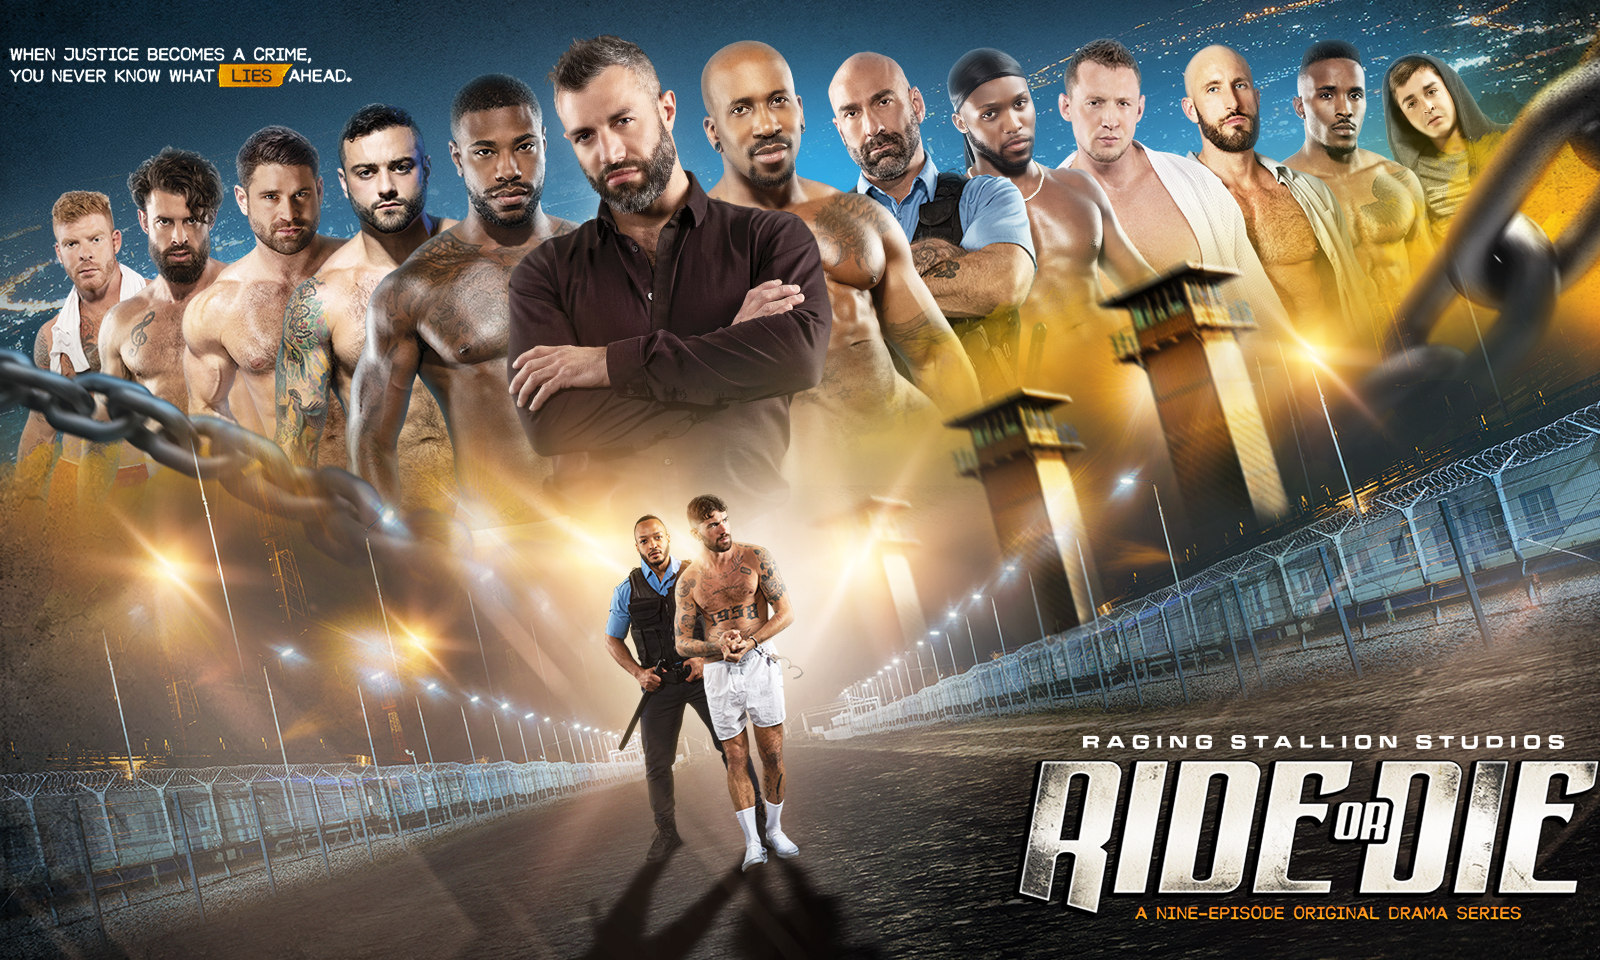 Raging Stallion's 'Ride or Die' Released in Two-Disc Set